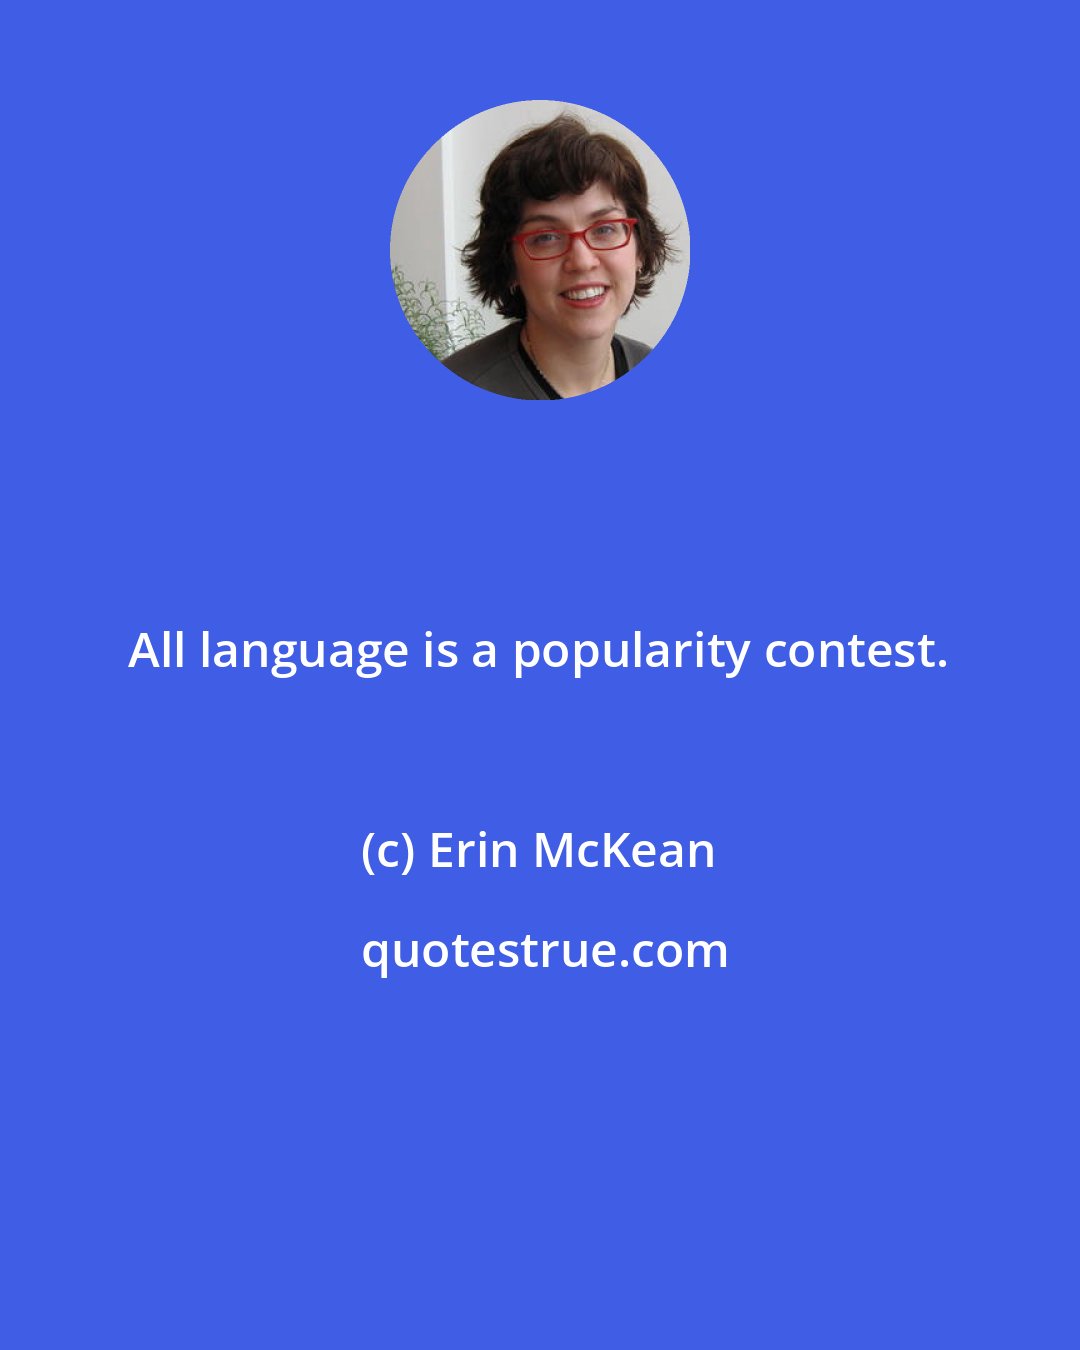 Erin McKean: All language is a popularity contest.